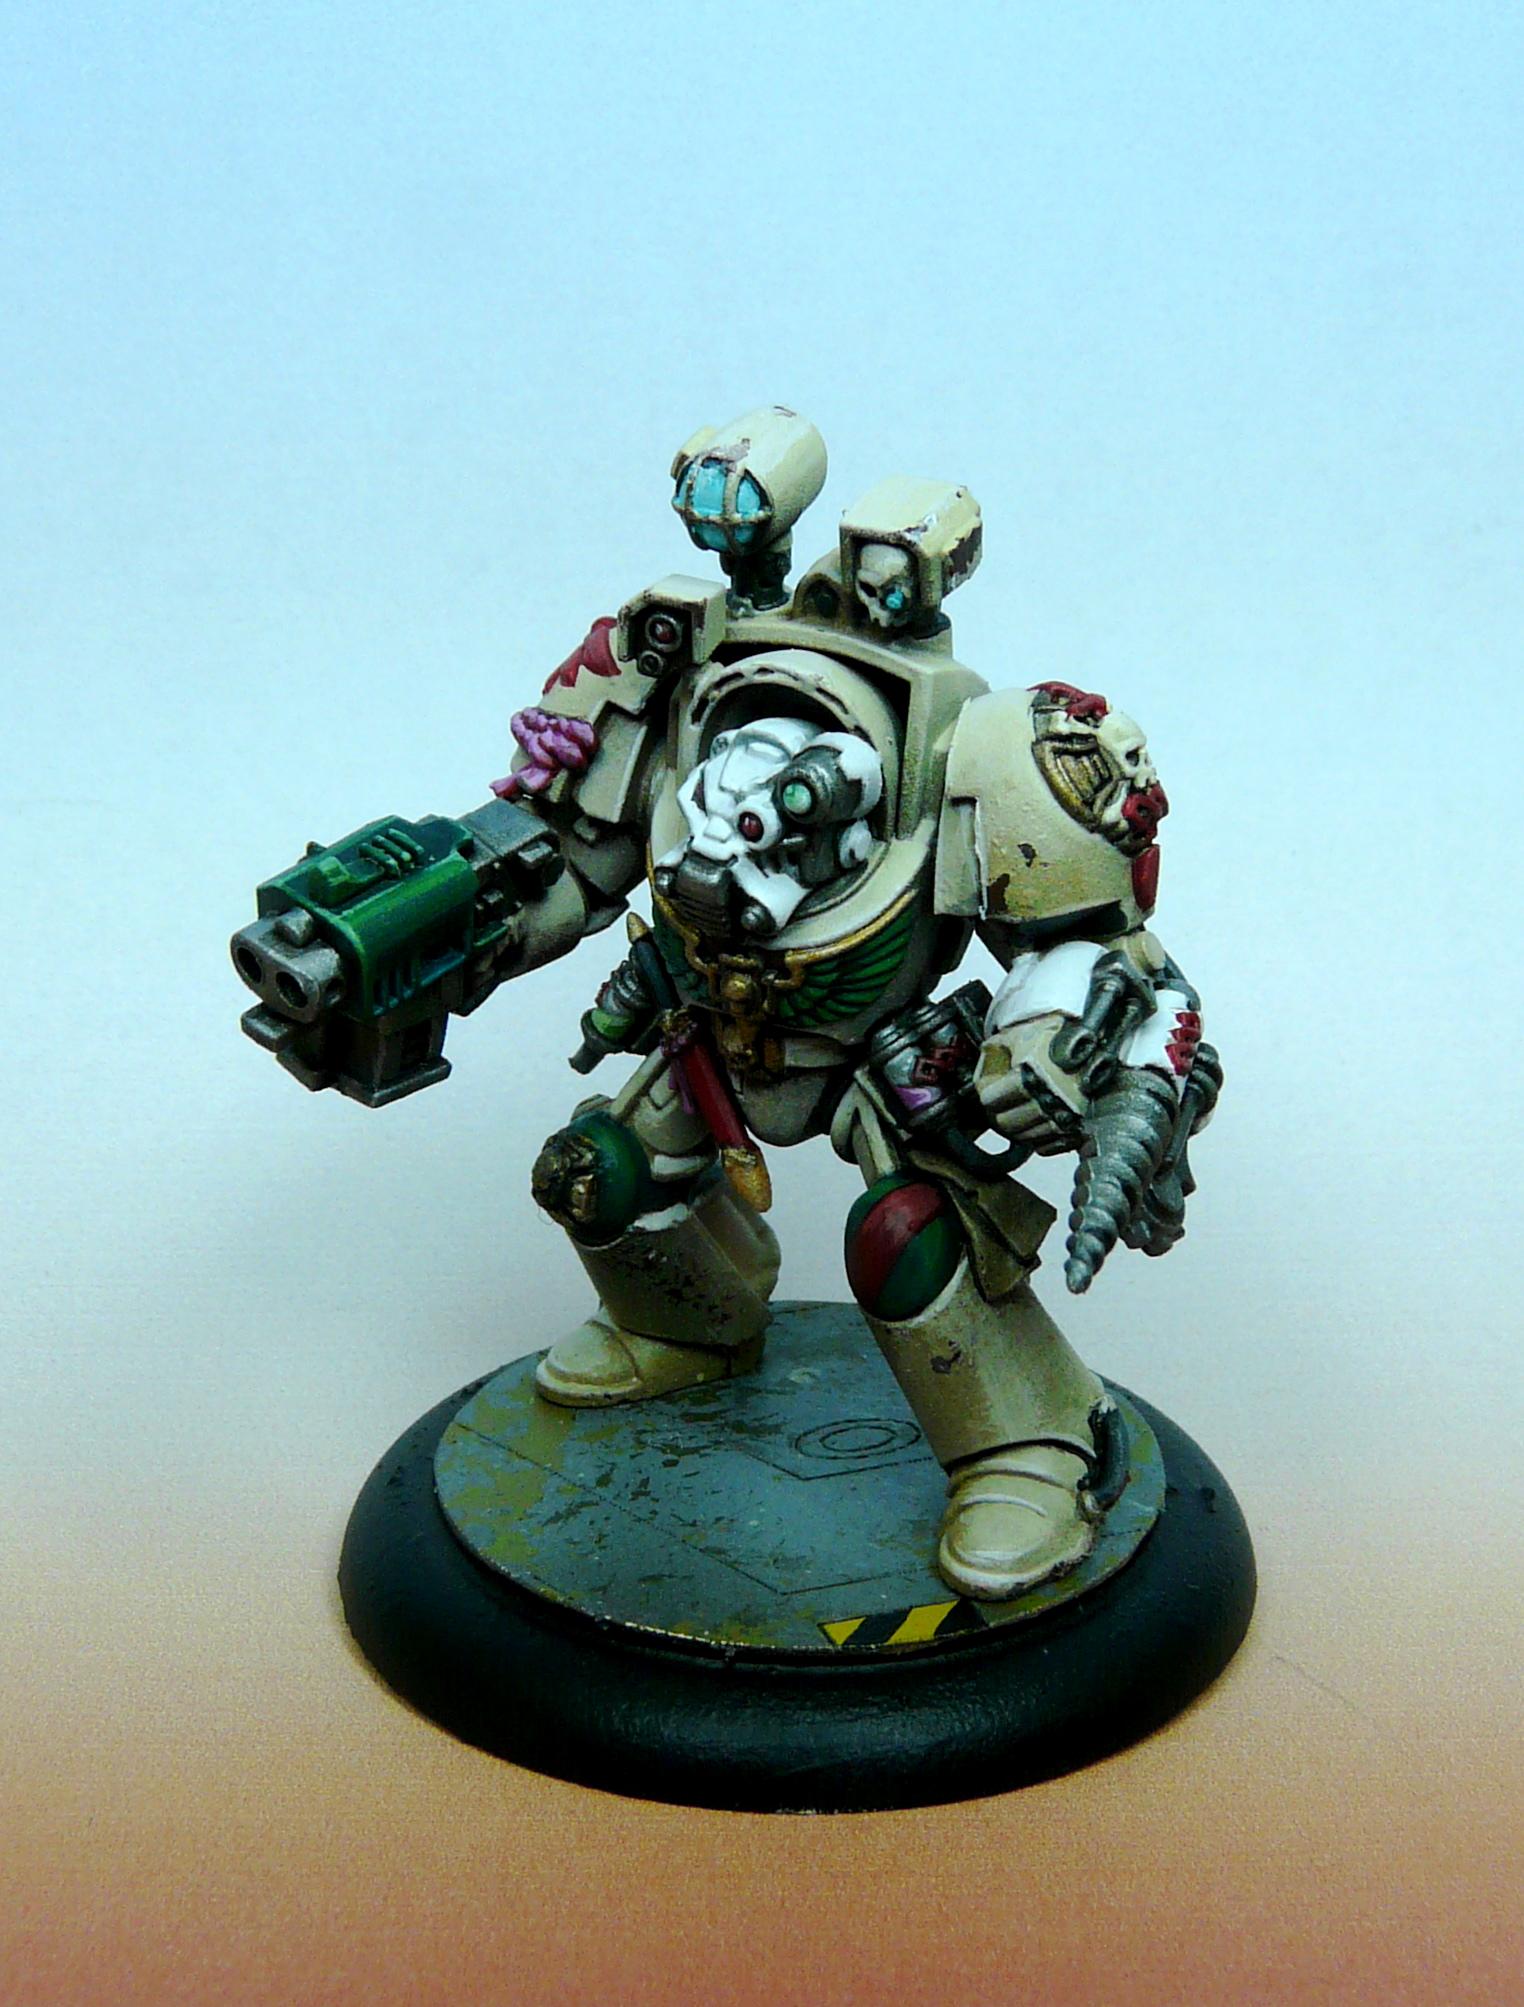 Apothecary, Dark Angels, Deathwing, Infantry, Space Marines, Terminator Armor, Warhammer 40,000